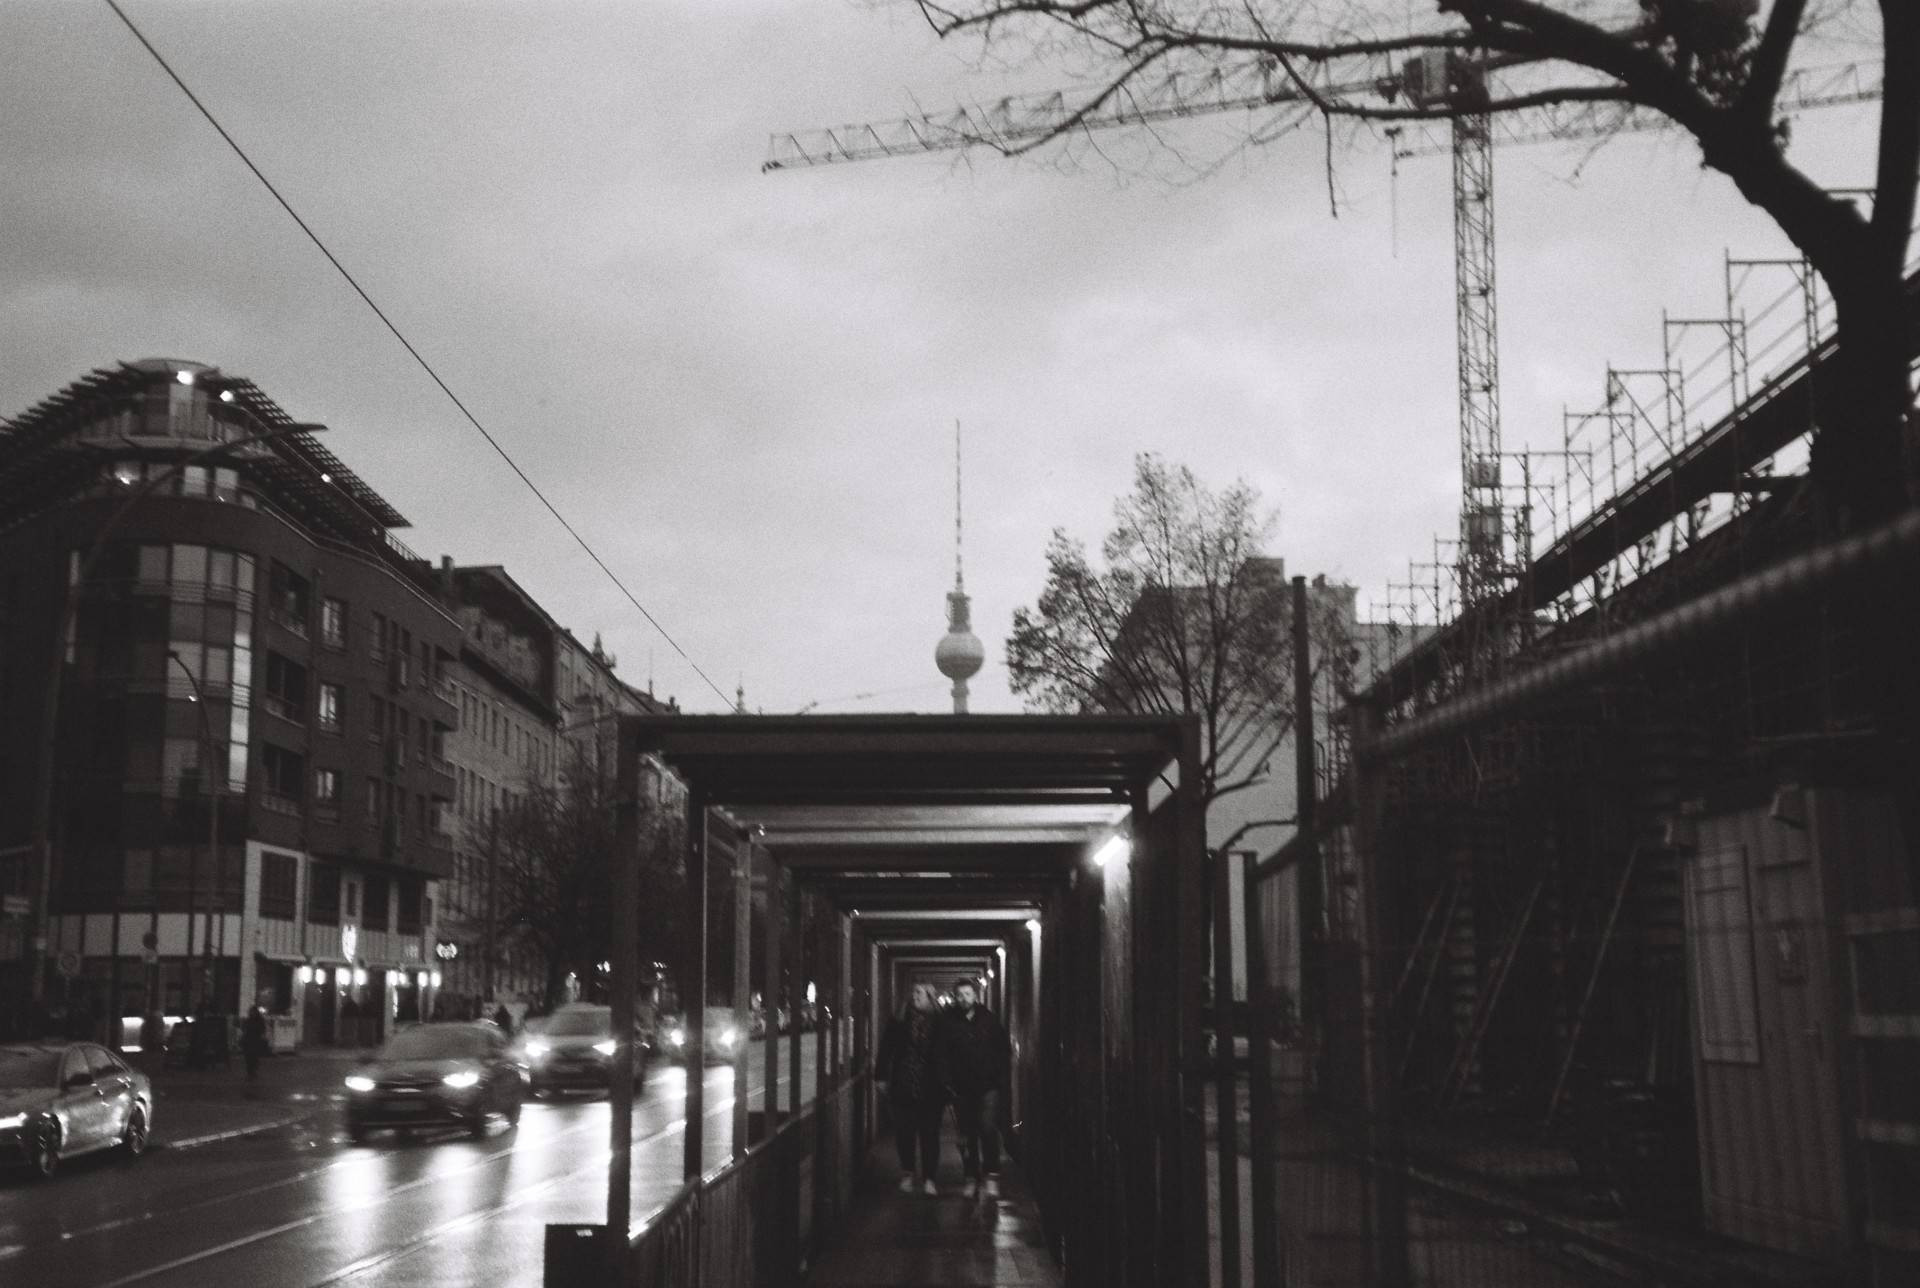 a couple walking towards the camera through a tunnel on the sidewalk due to the construction next to it, TV Tower is seen on the background under the grey cloudy sky